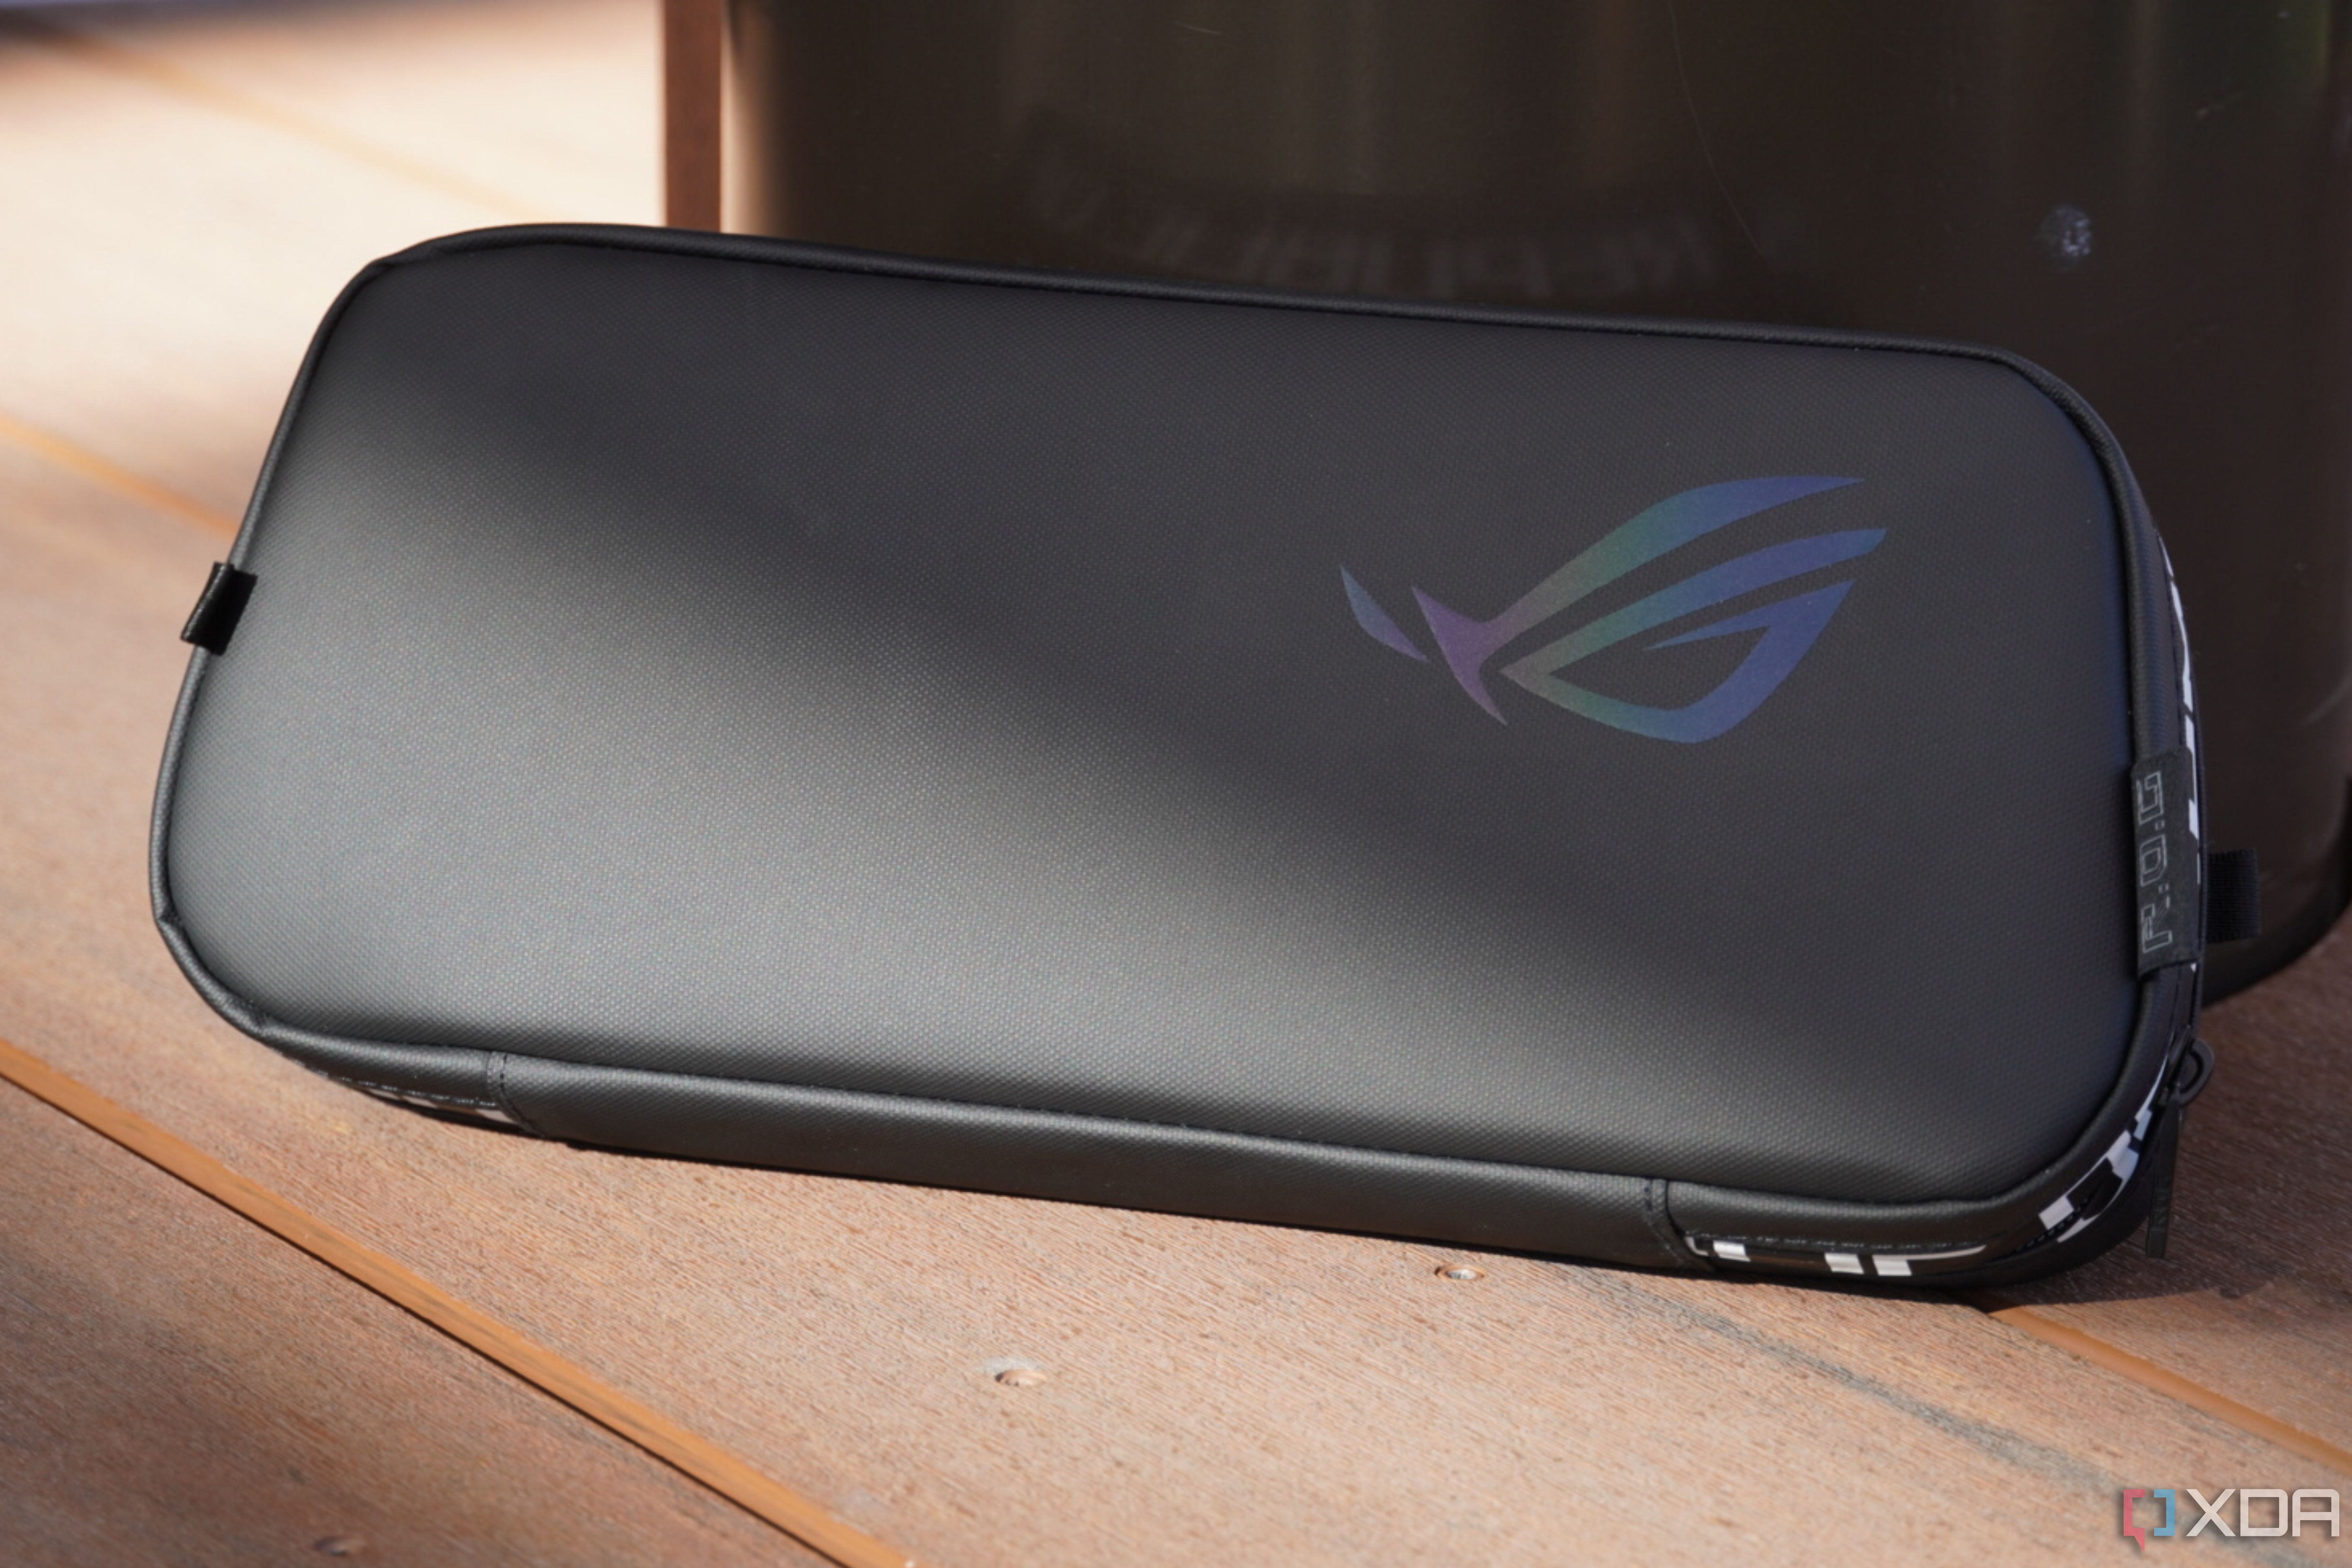 The ROG Ally travel case under a ray of sunlight.